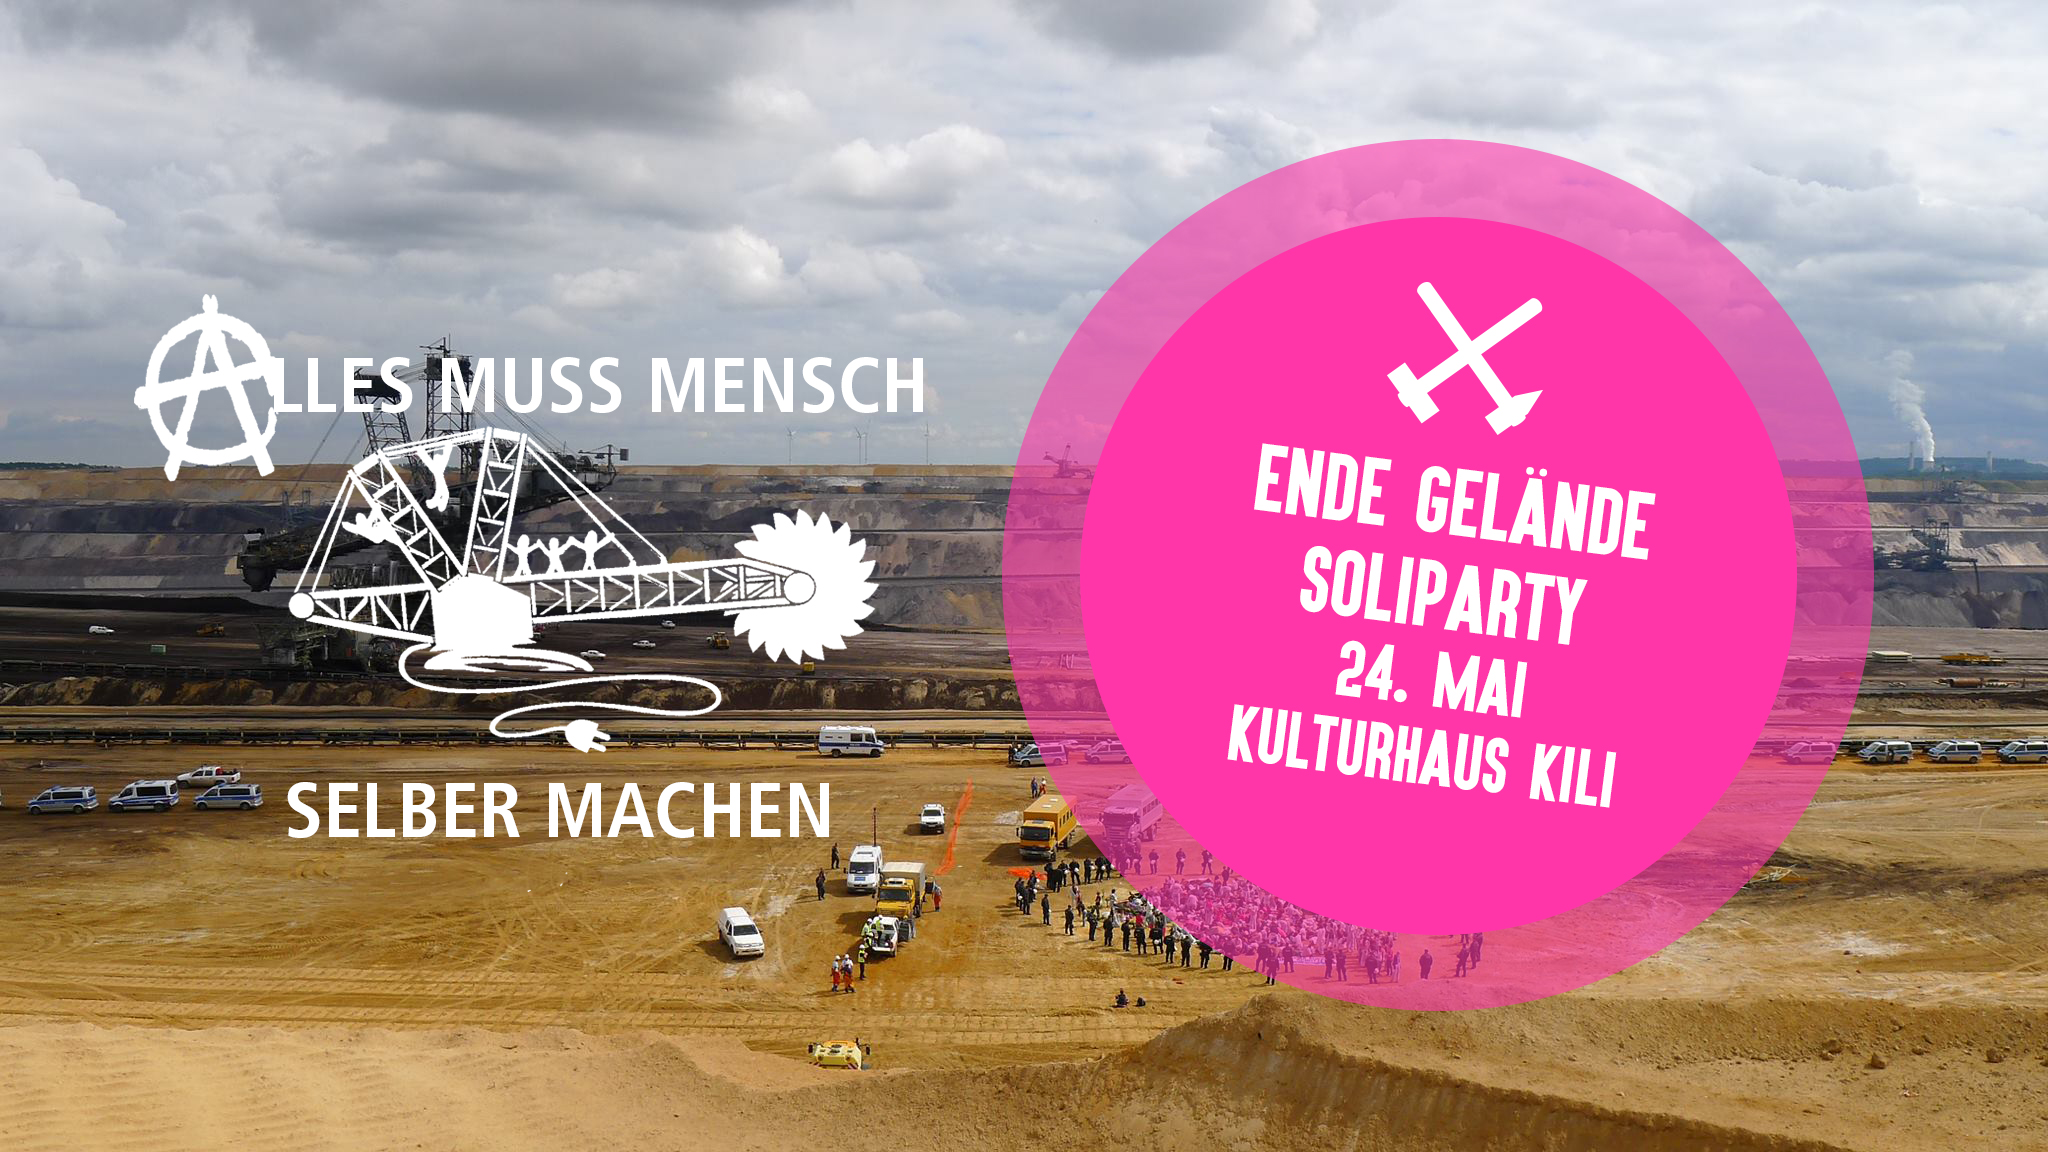 Soliparty am 24. Mai